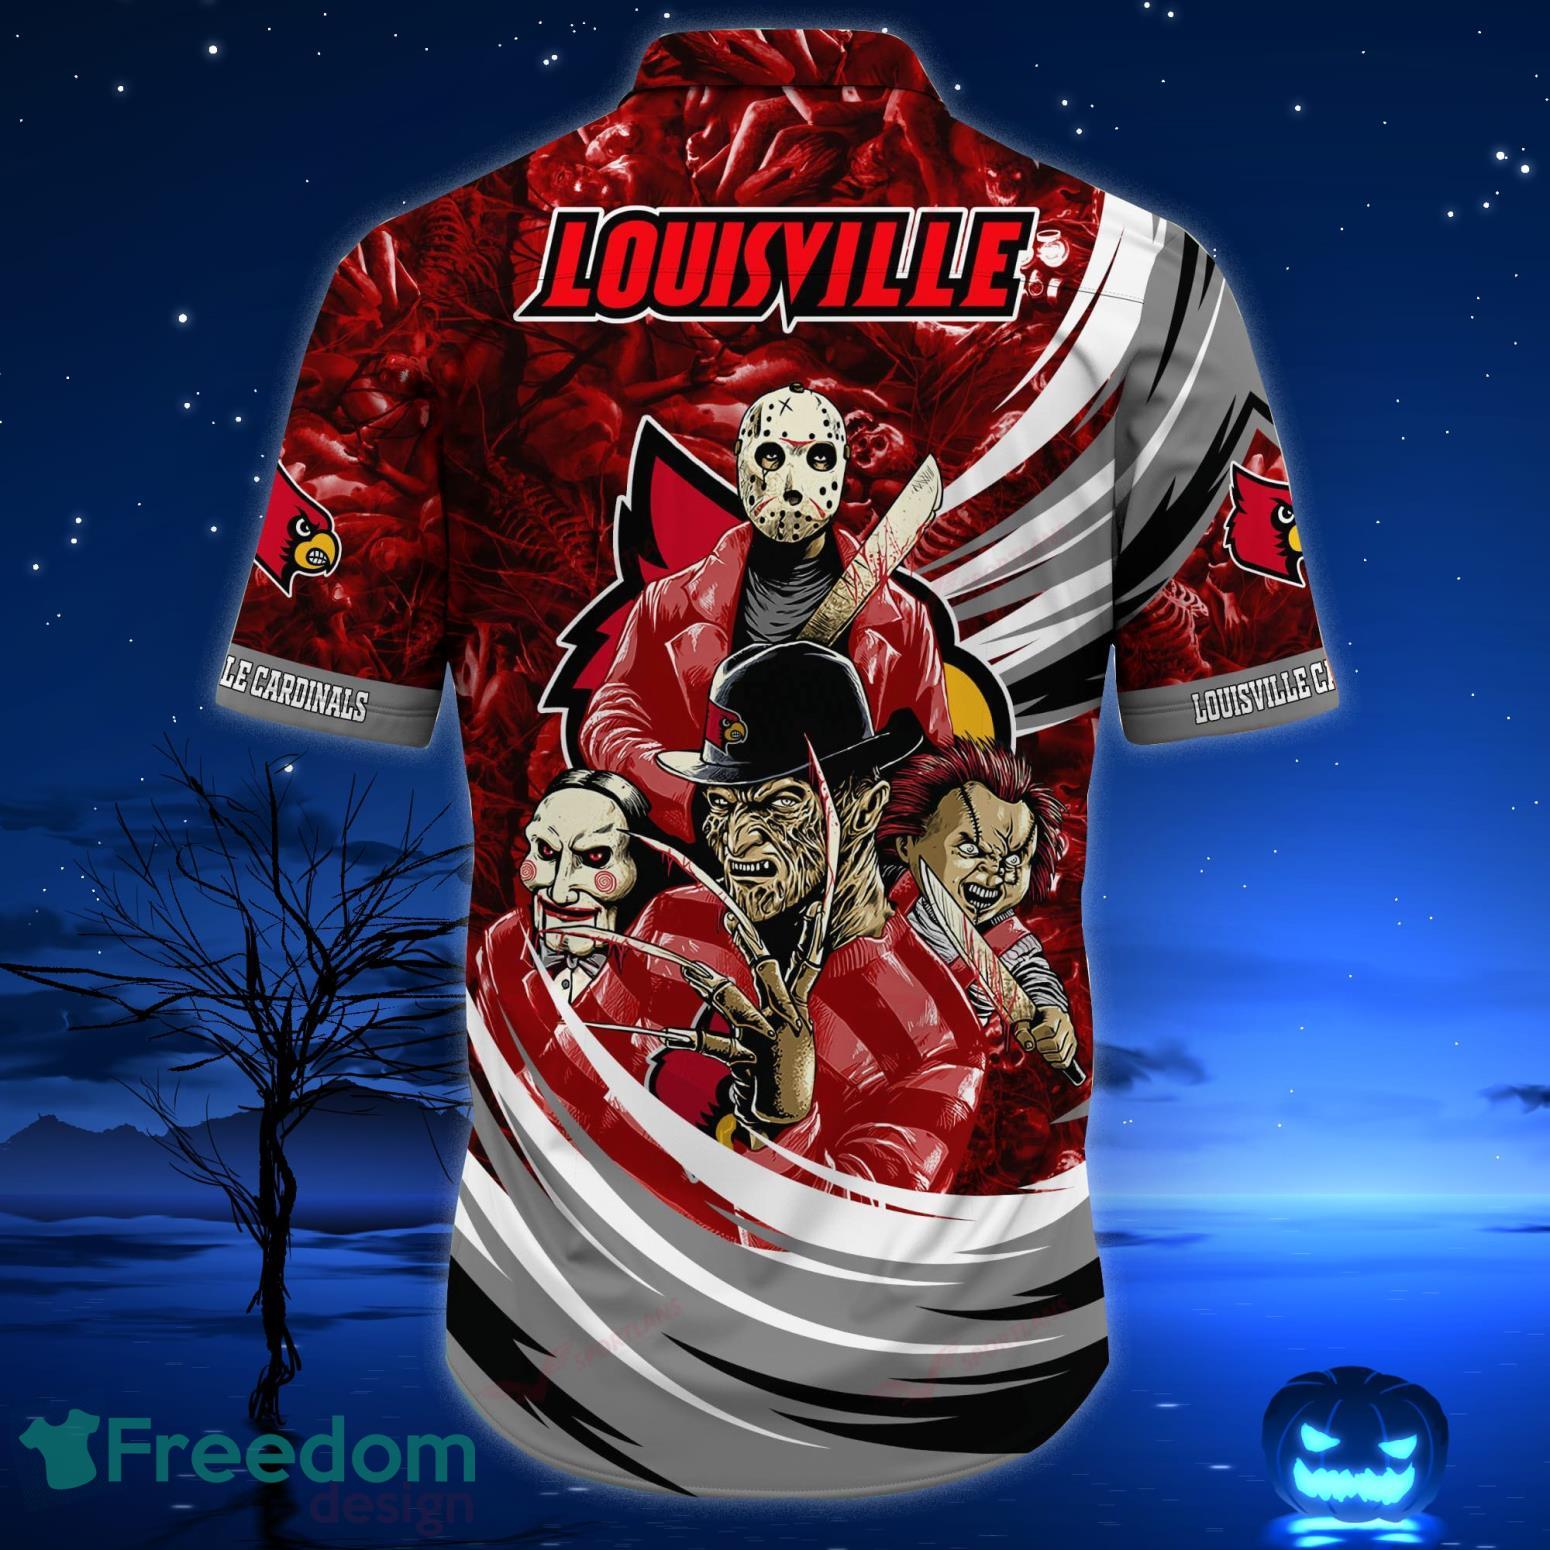 Louisville Cardinals Personalized Name Tropical Floral Men Women Hawaiian  Shirt And Shorts For NCAA Football Fans - YesItCustom